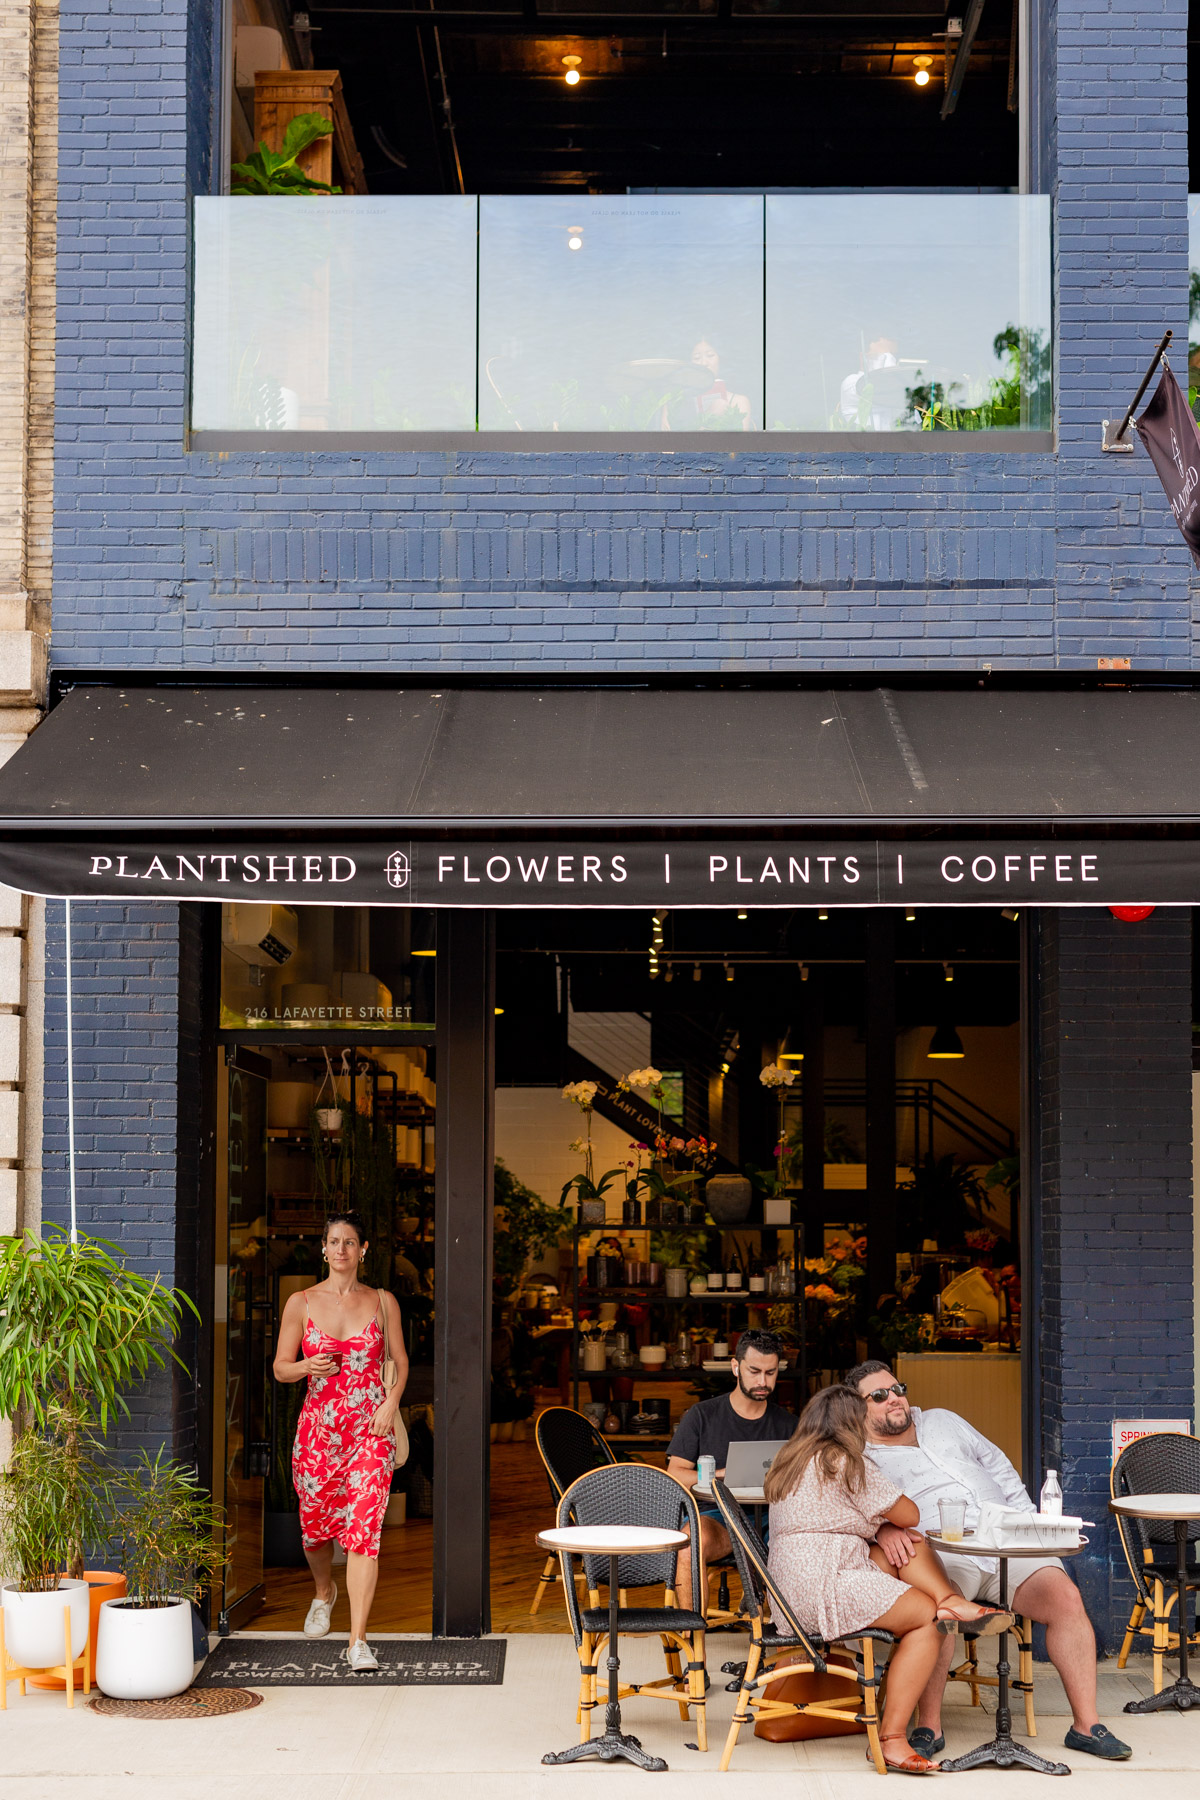 Plantshed SoHo in the Spring
Best cafes to work at NYC